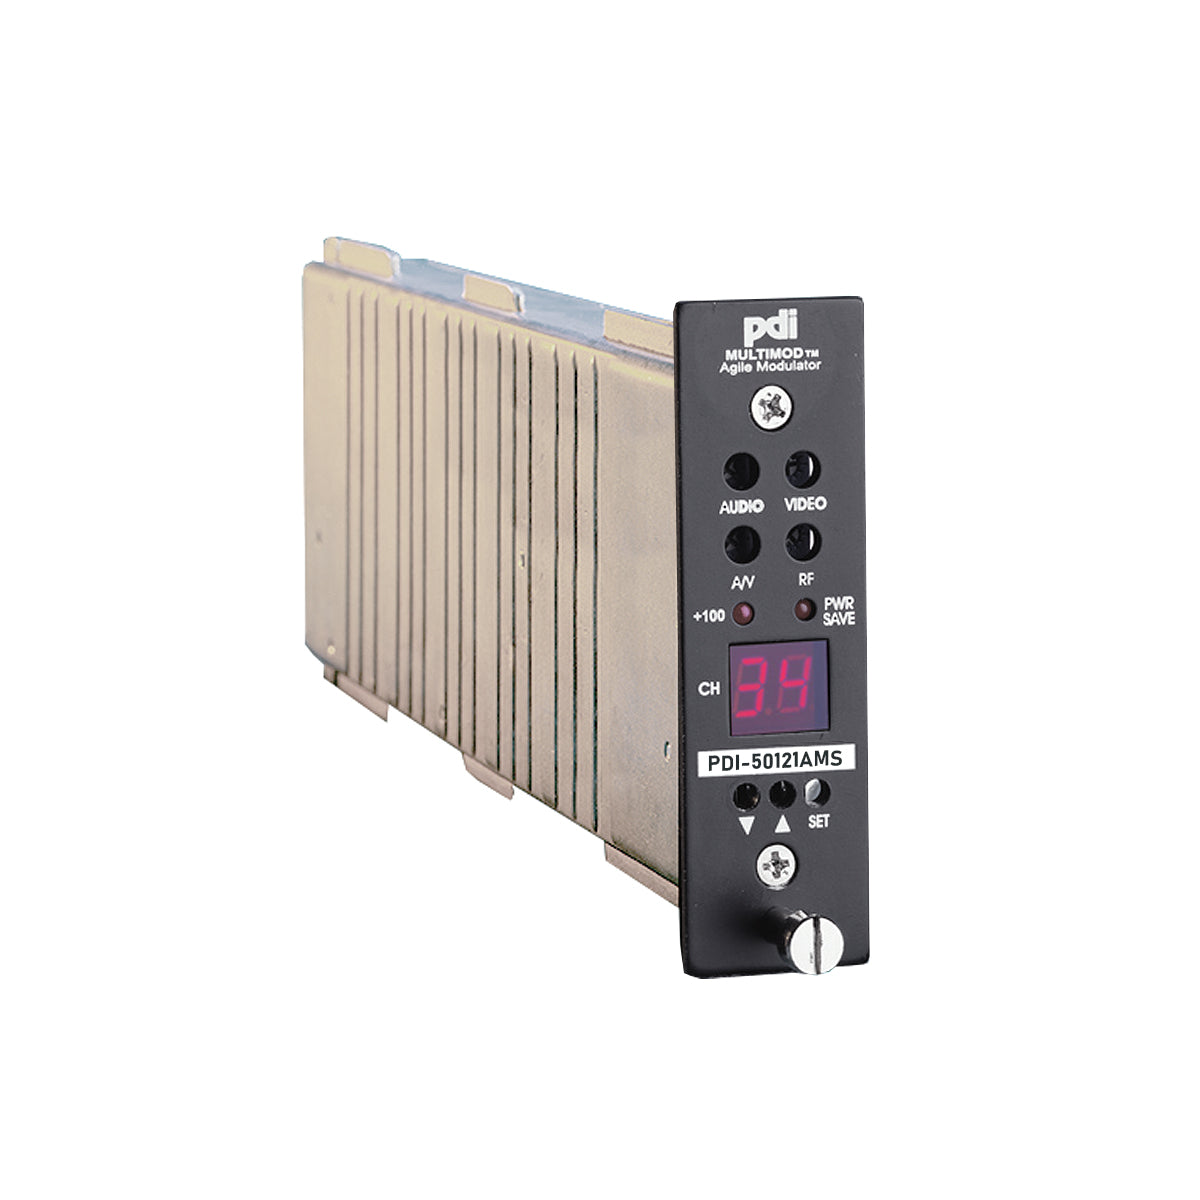 PDI-50121AMS 860MHz SAW Filtered 134 Channel 50dBmV Frequency Agile Mini Stereo Modulator